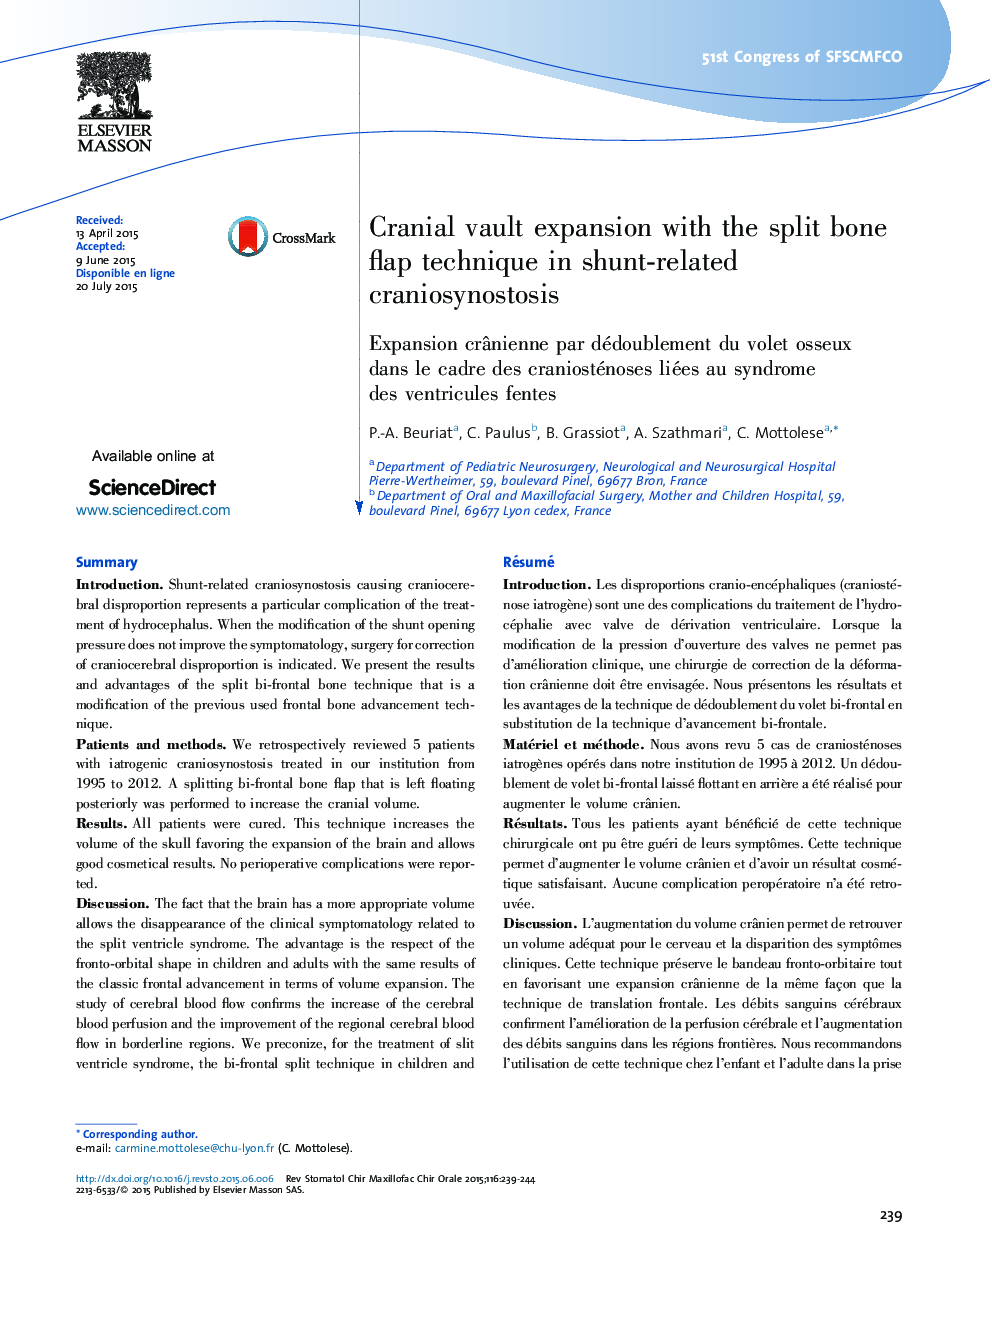 Cranial vault expansion with the split bone flap technique in shunt-related craniosynostosis